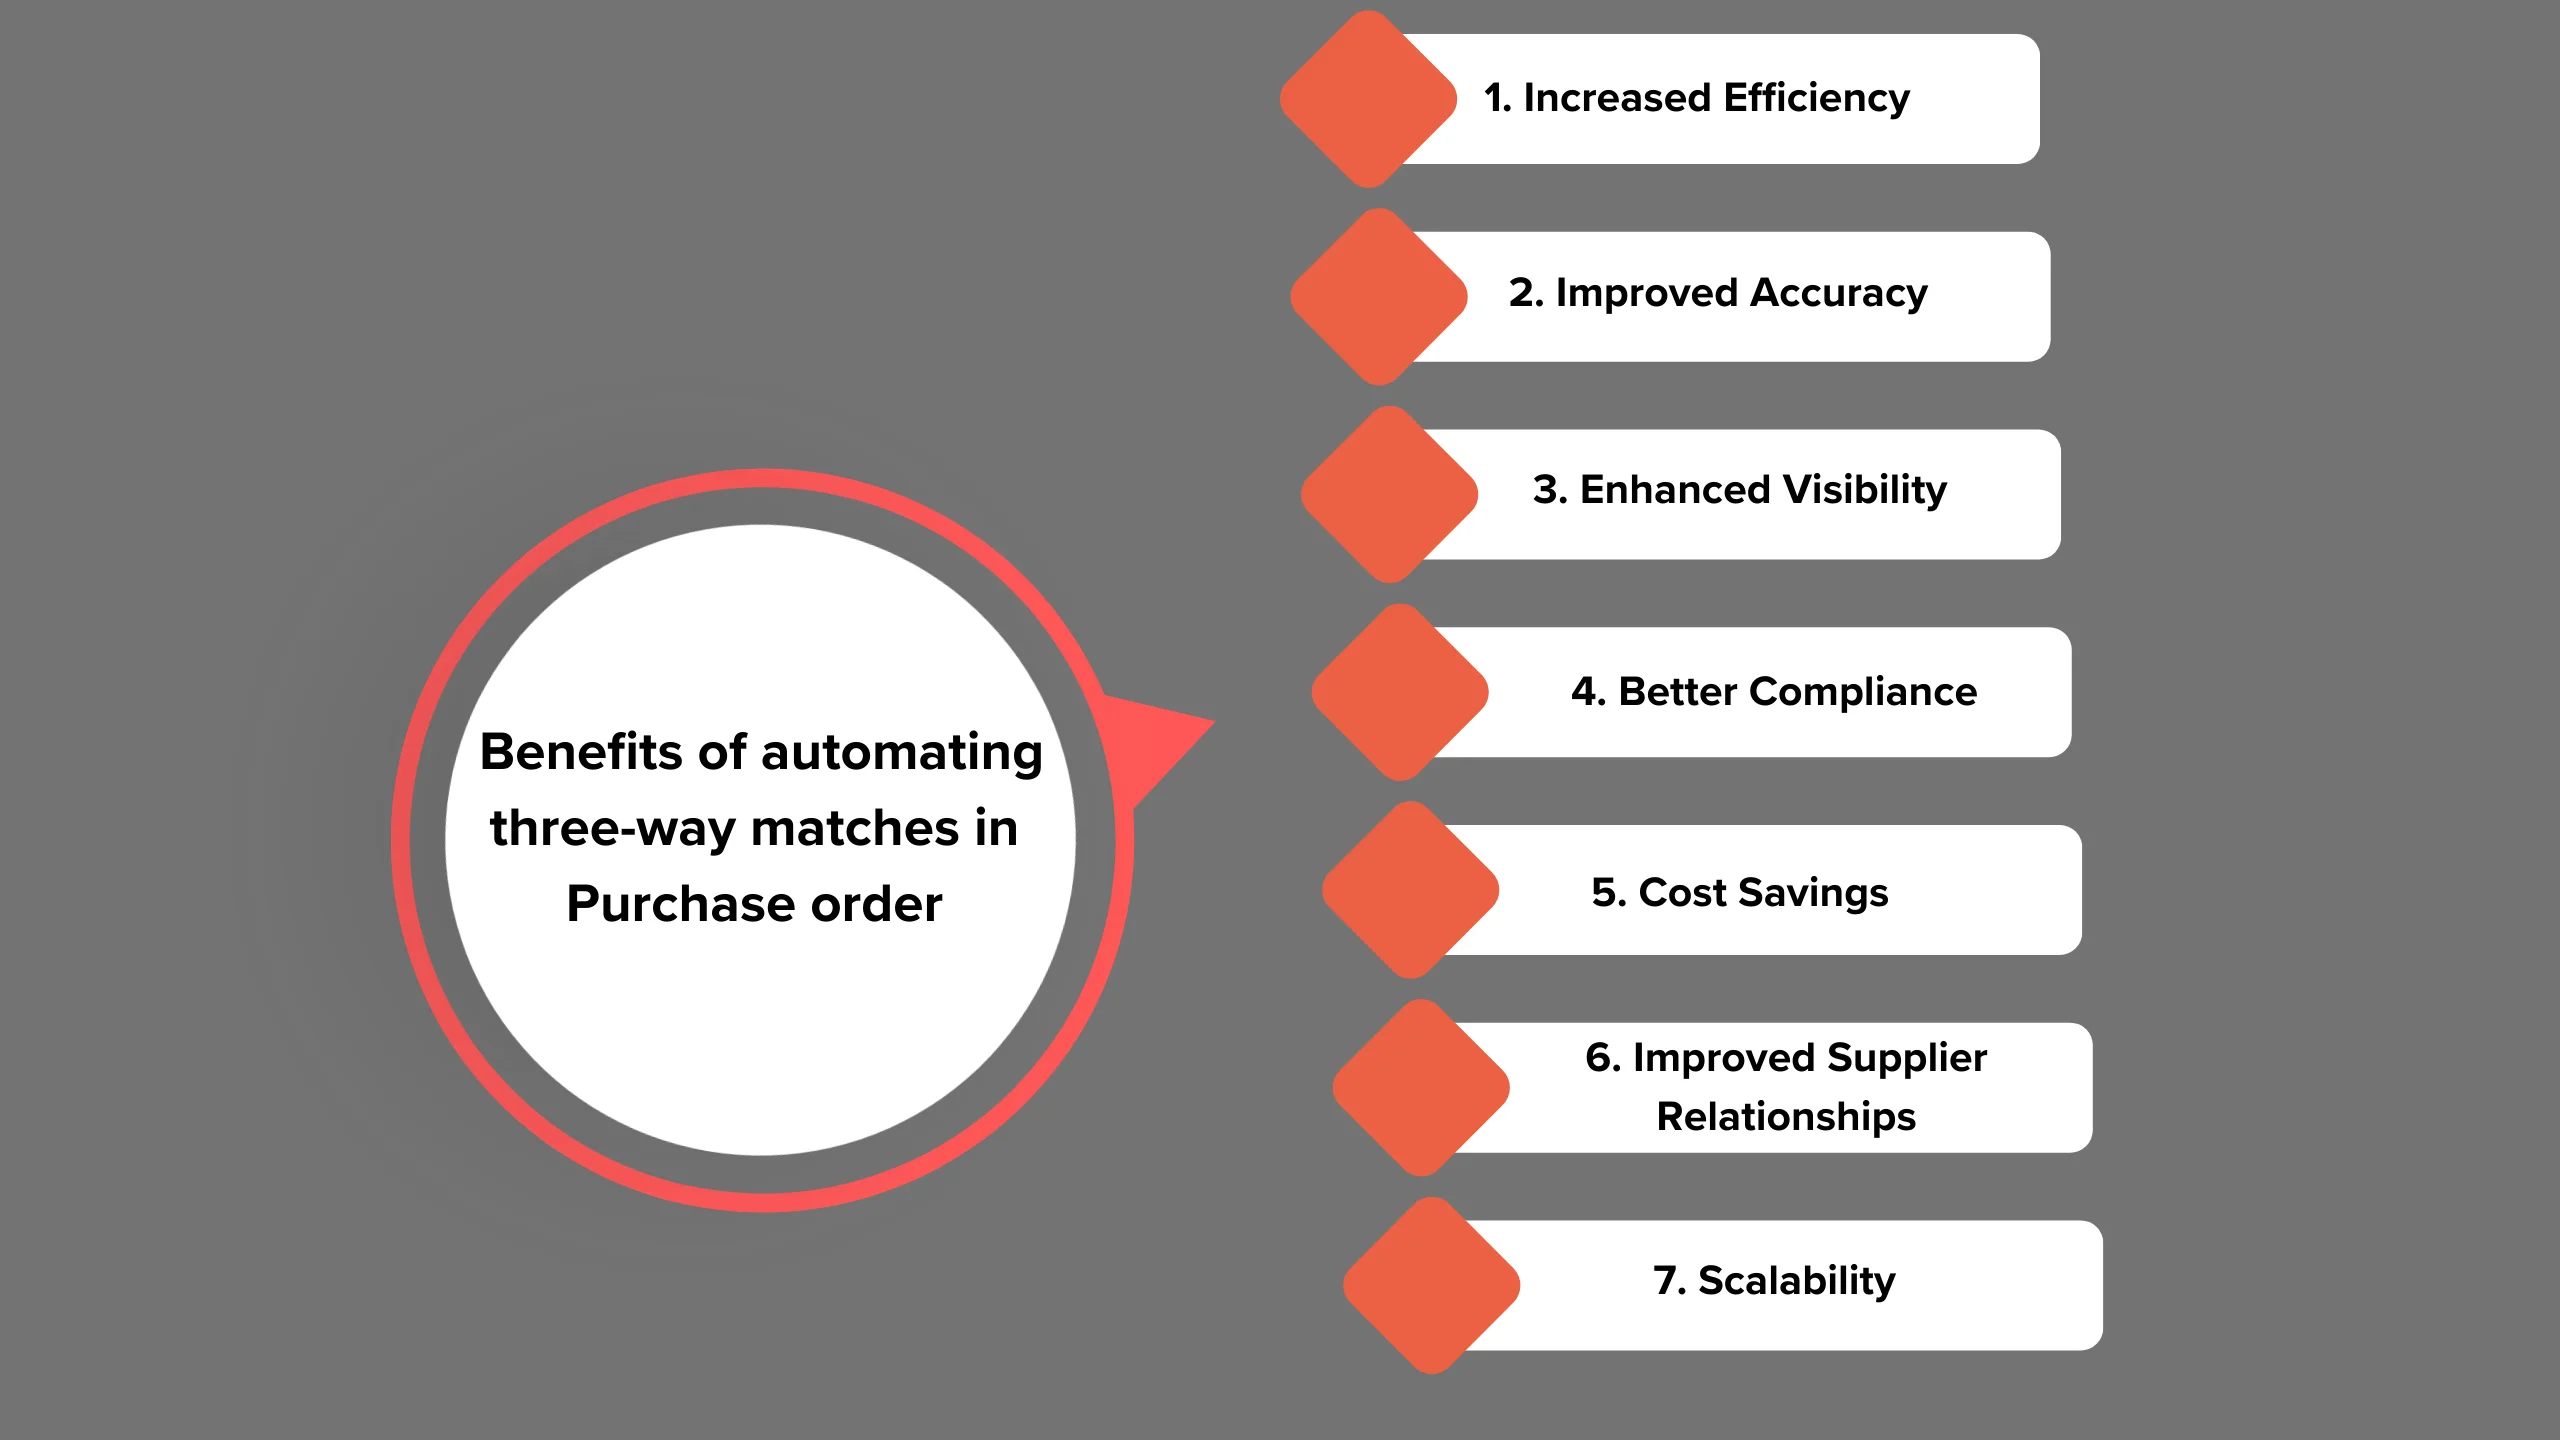 Automating the three-way match process in purchase orders offers several benefits for businesses, including increased efficiency, improved accuracy, enhanced visibility, better compliance